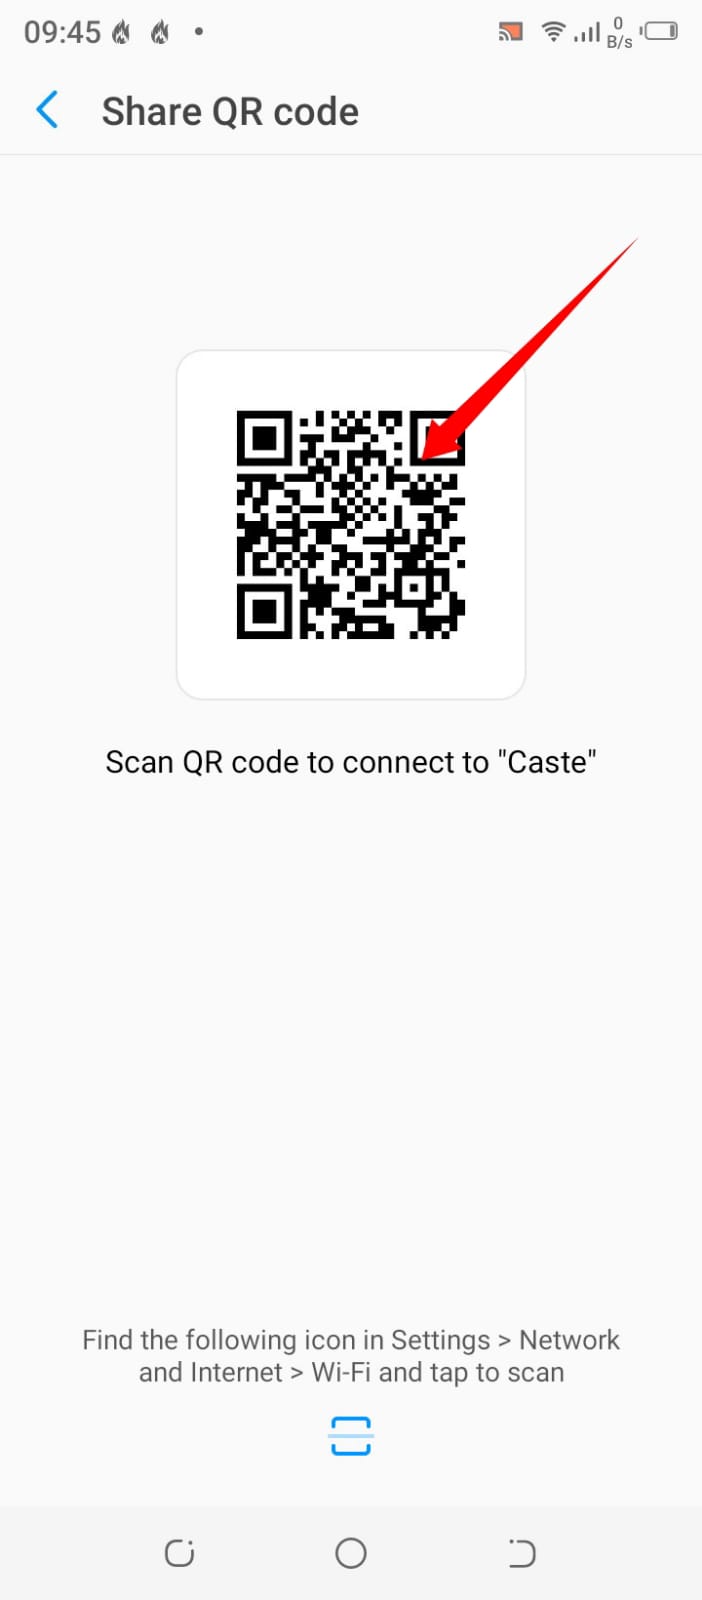 scan the QR code to connect